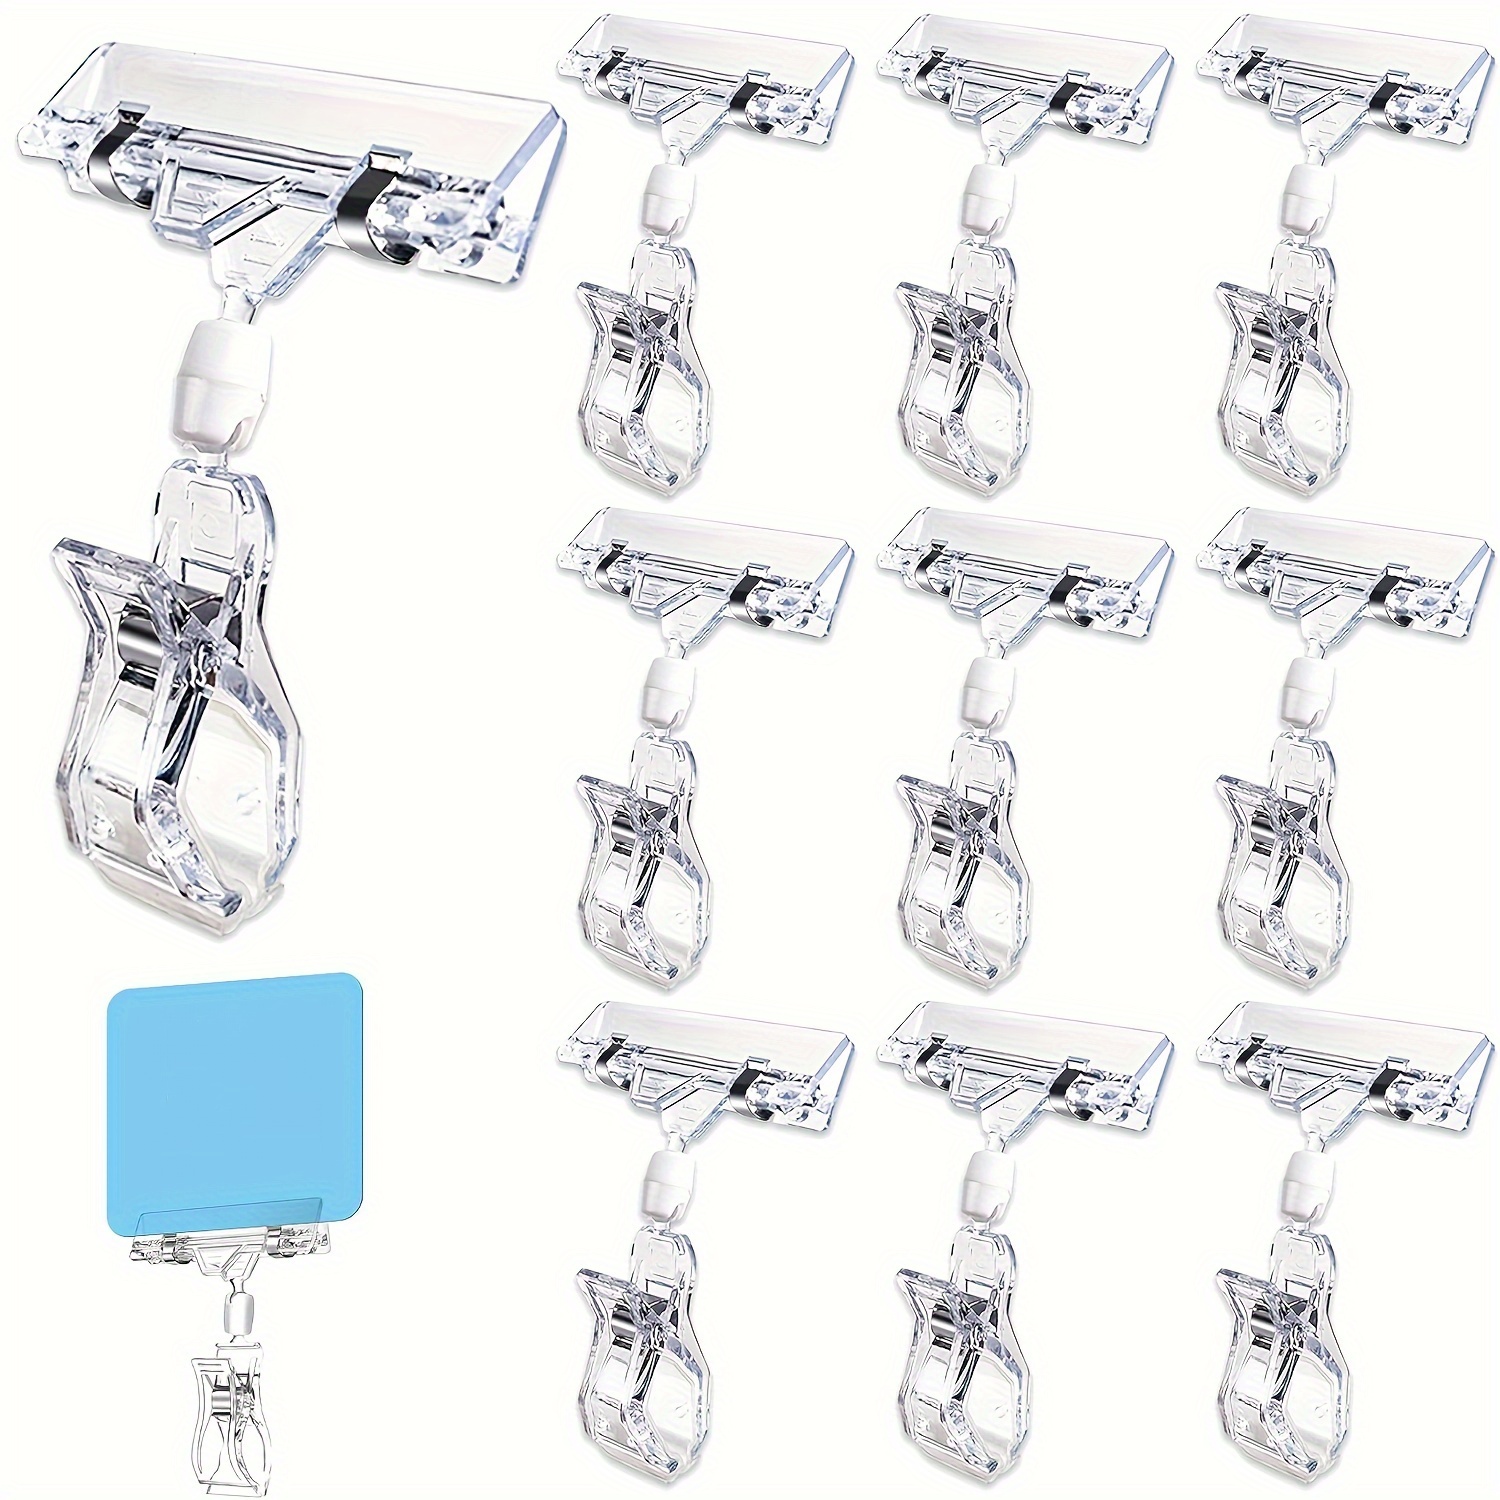 

10-piece Double-sided Sign Holders For Retail Display - Clear Acrylic Price Tag Clips, Rotatable Clamps For Shelves, Baskets & Cards